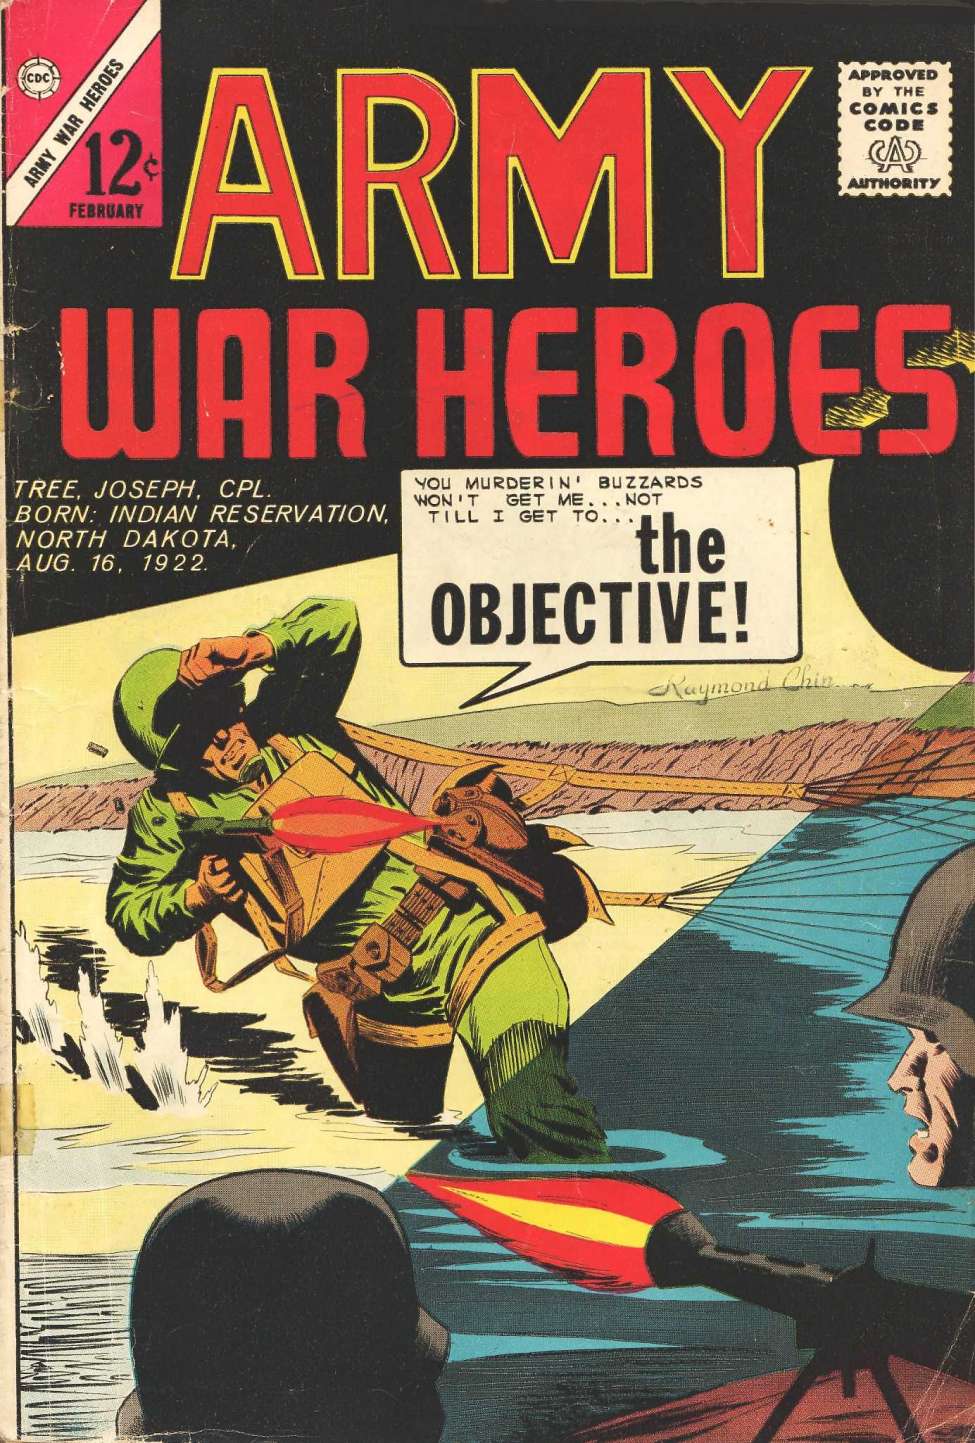 Comic Book Cover For Army War Heroes 2